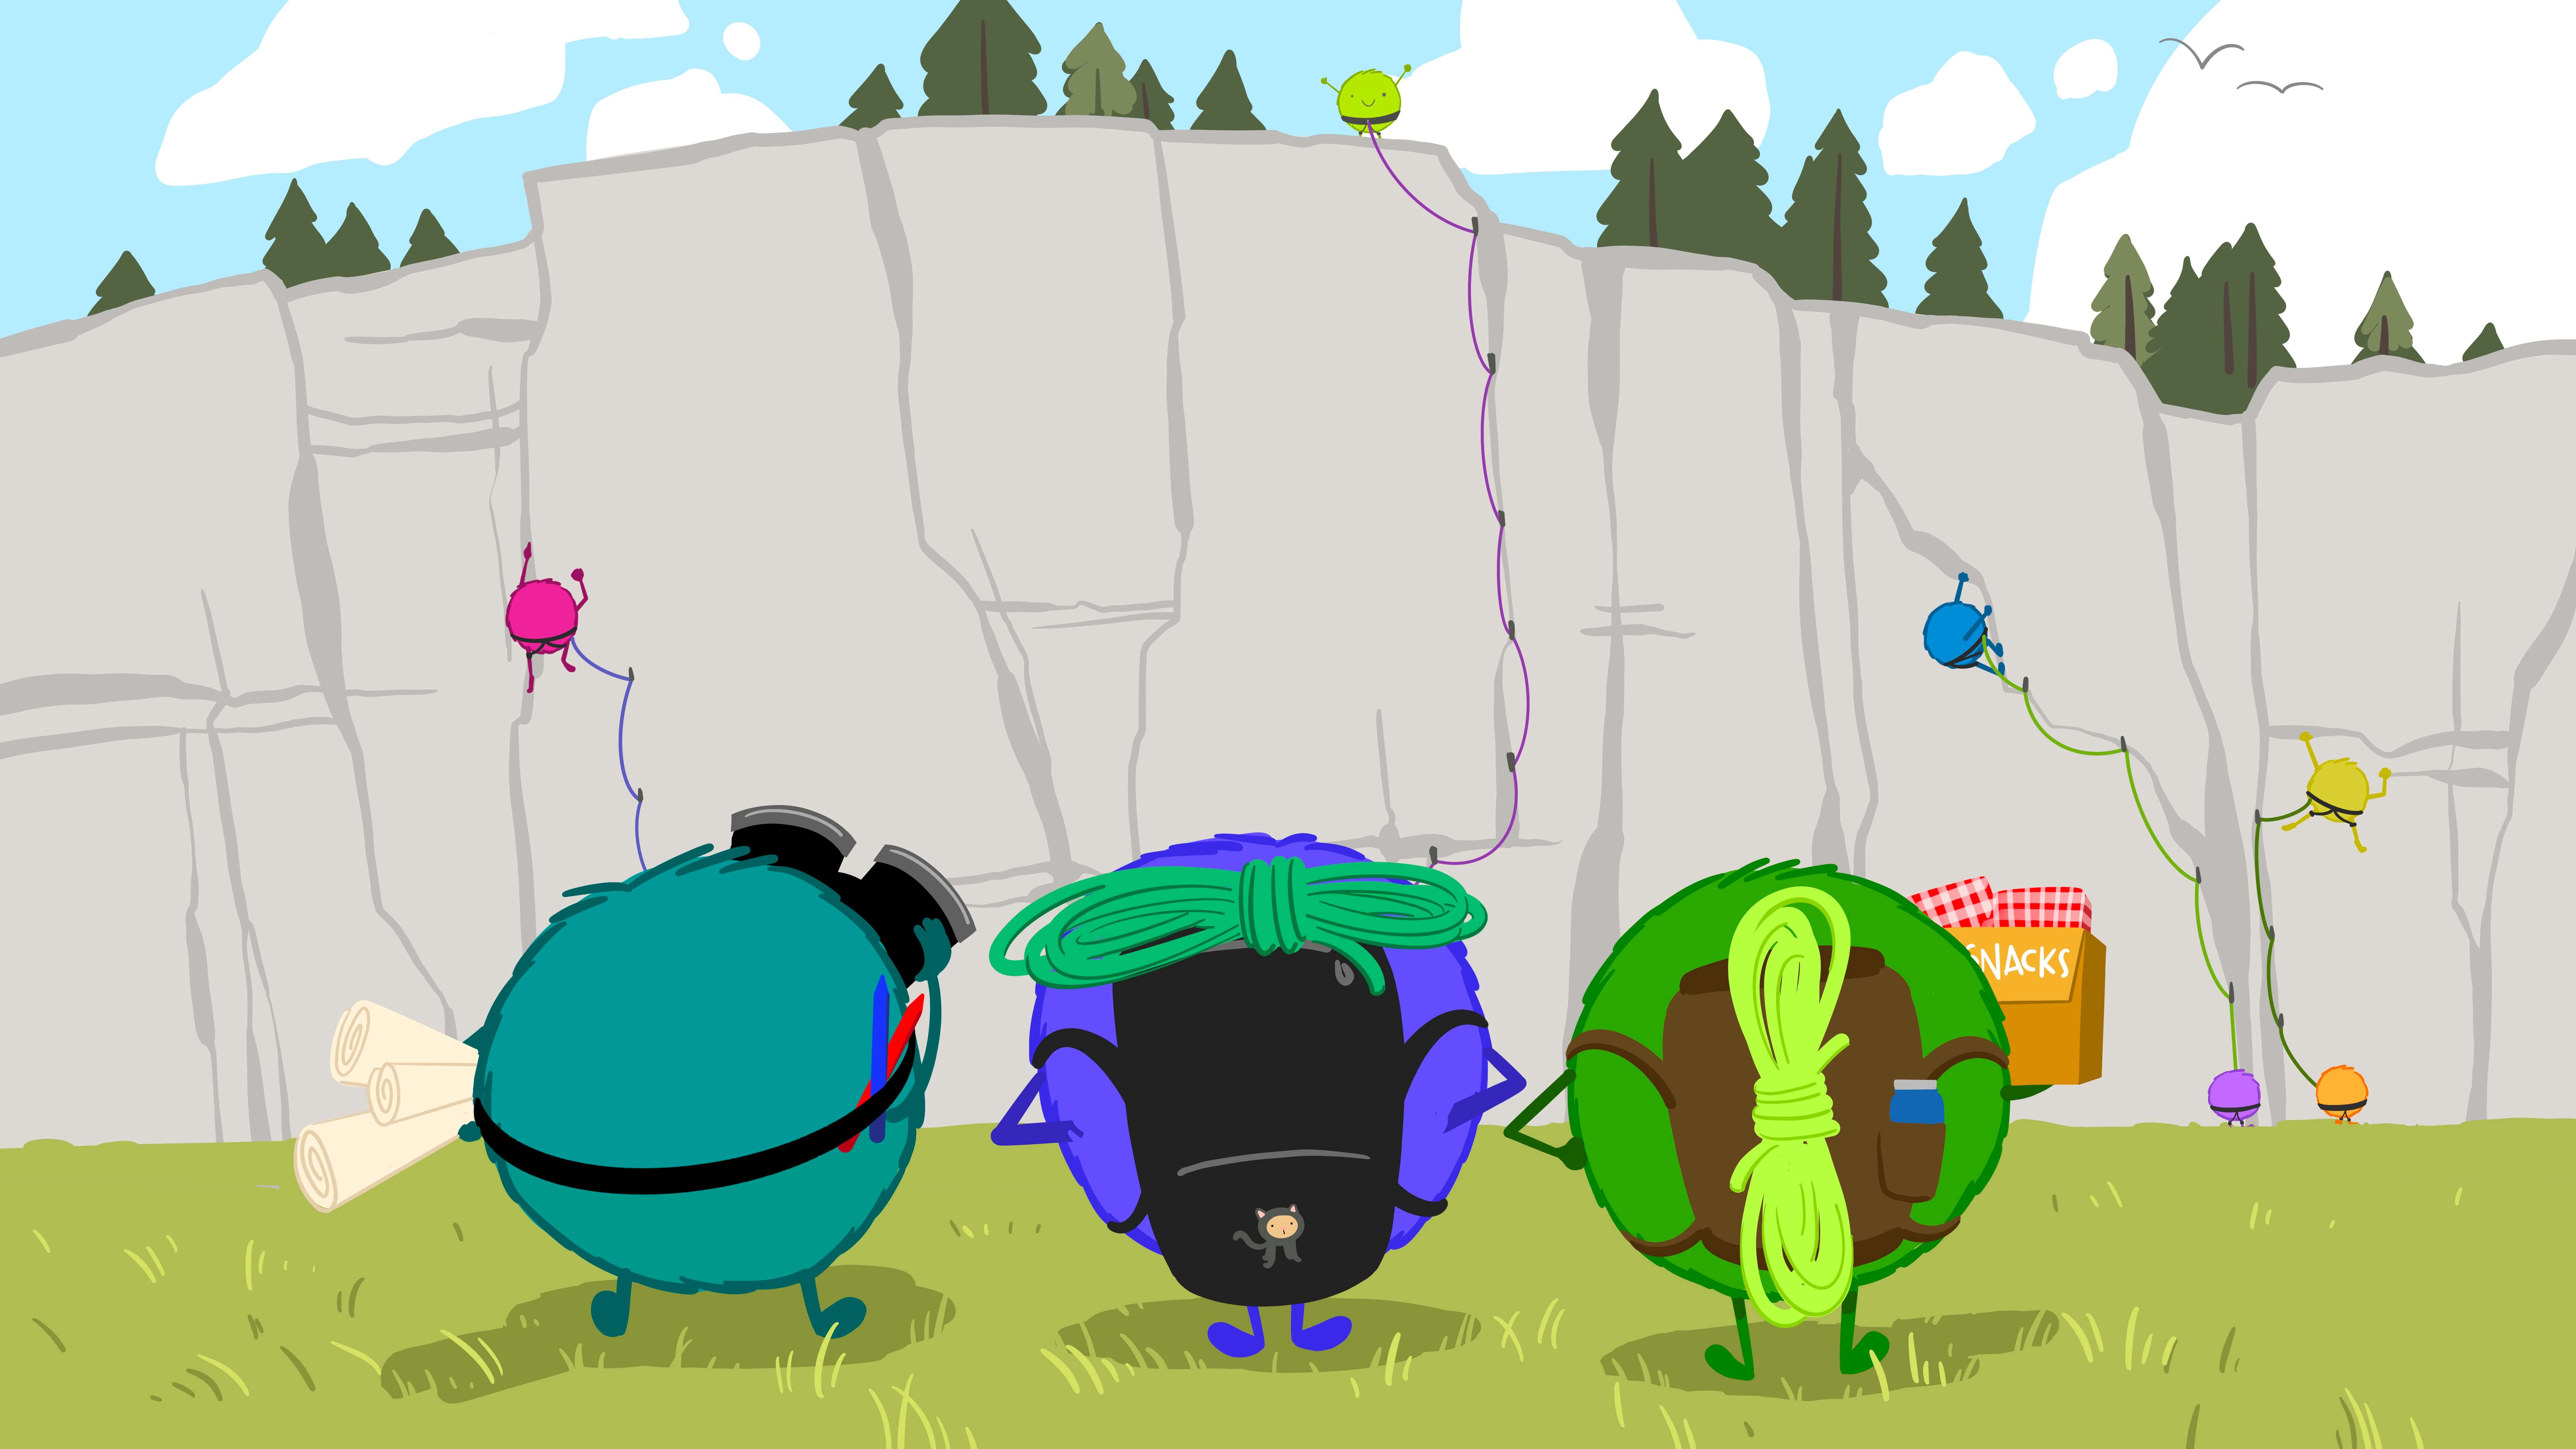 Rear-view of three well-prepared monsters arriving at a climb. They have route maps, binoculars, ropes, backpacks, and a box of snacks. The middle monster has a GitHub Octocat image on their backpack. In the distance, several monsters are at different stages of ascending, with one at the summit, and others supporting them from the base.